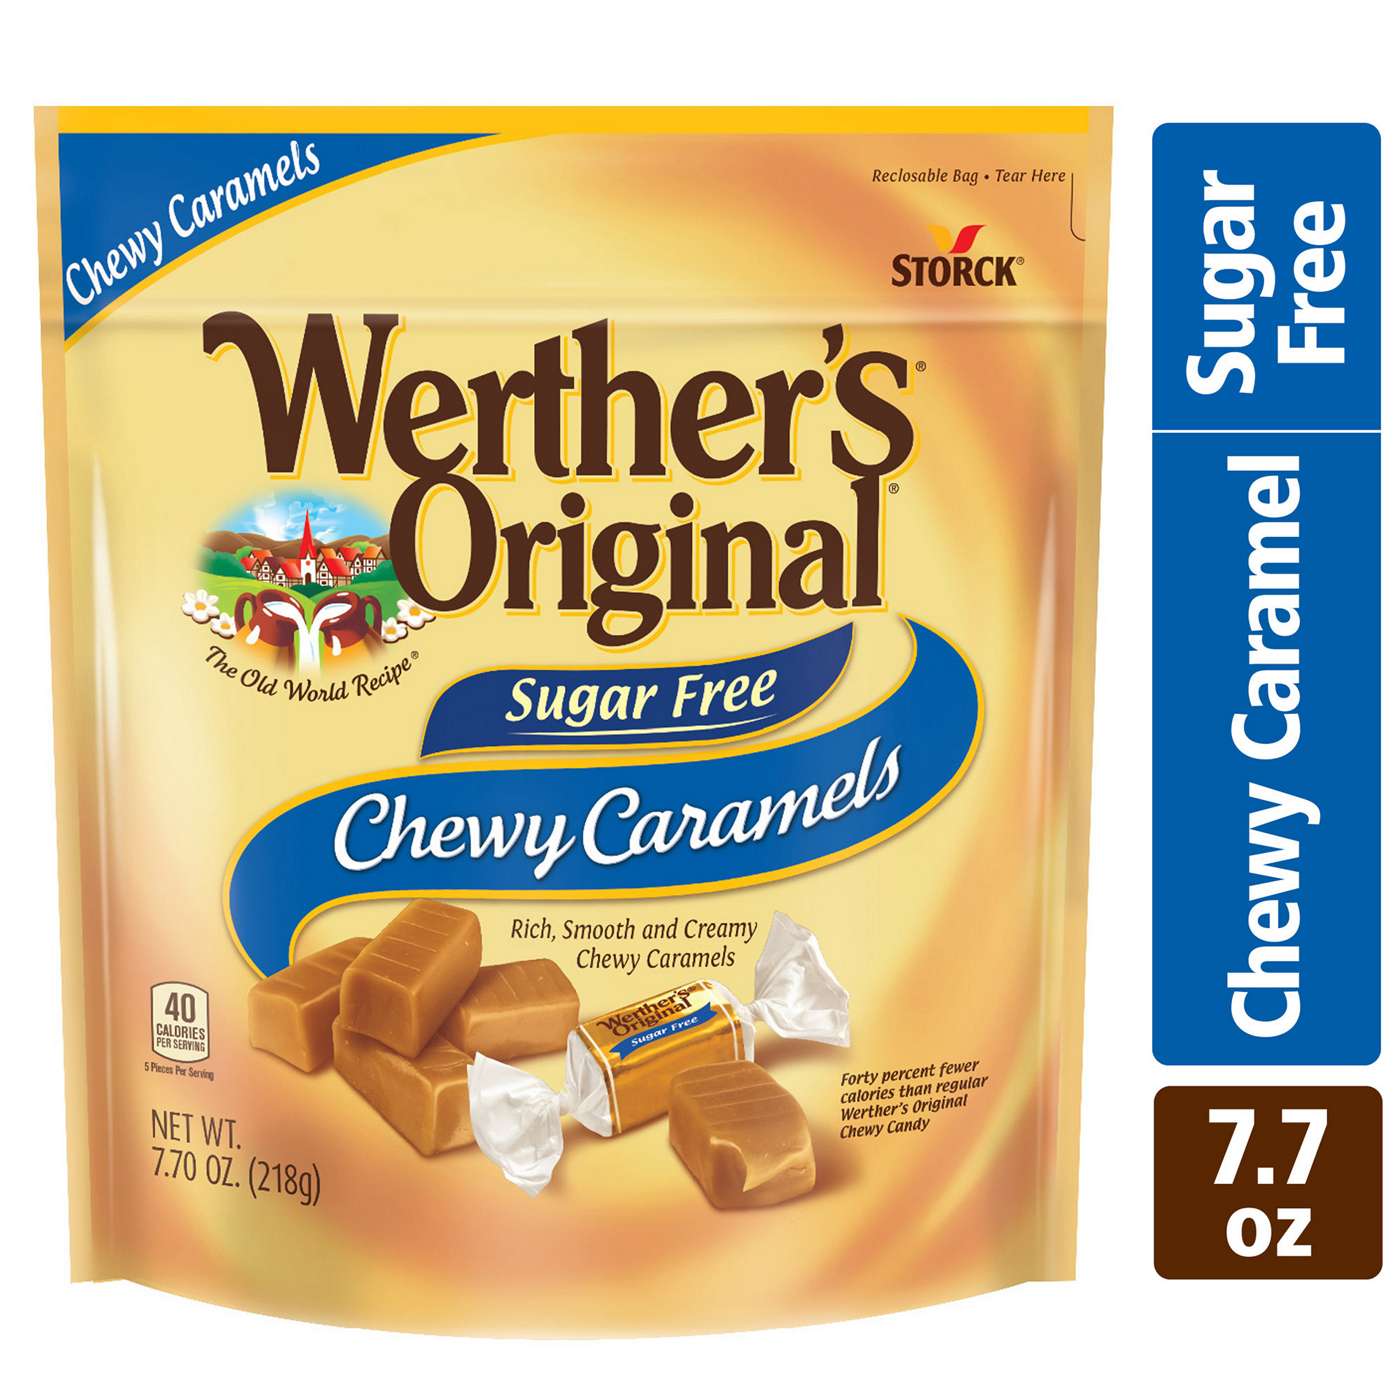 Werther's Original Sugar Free Chewy Caramels; image 4 of 6